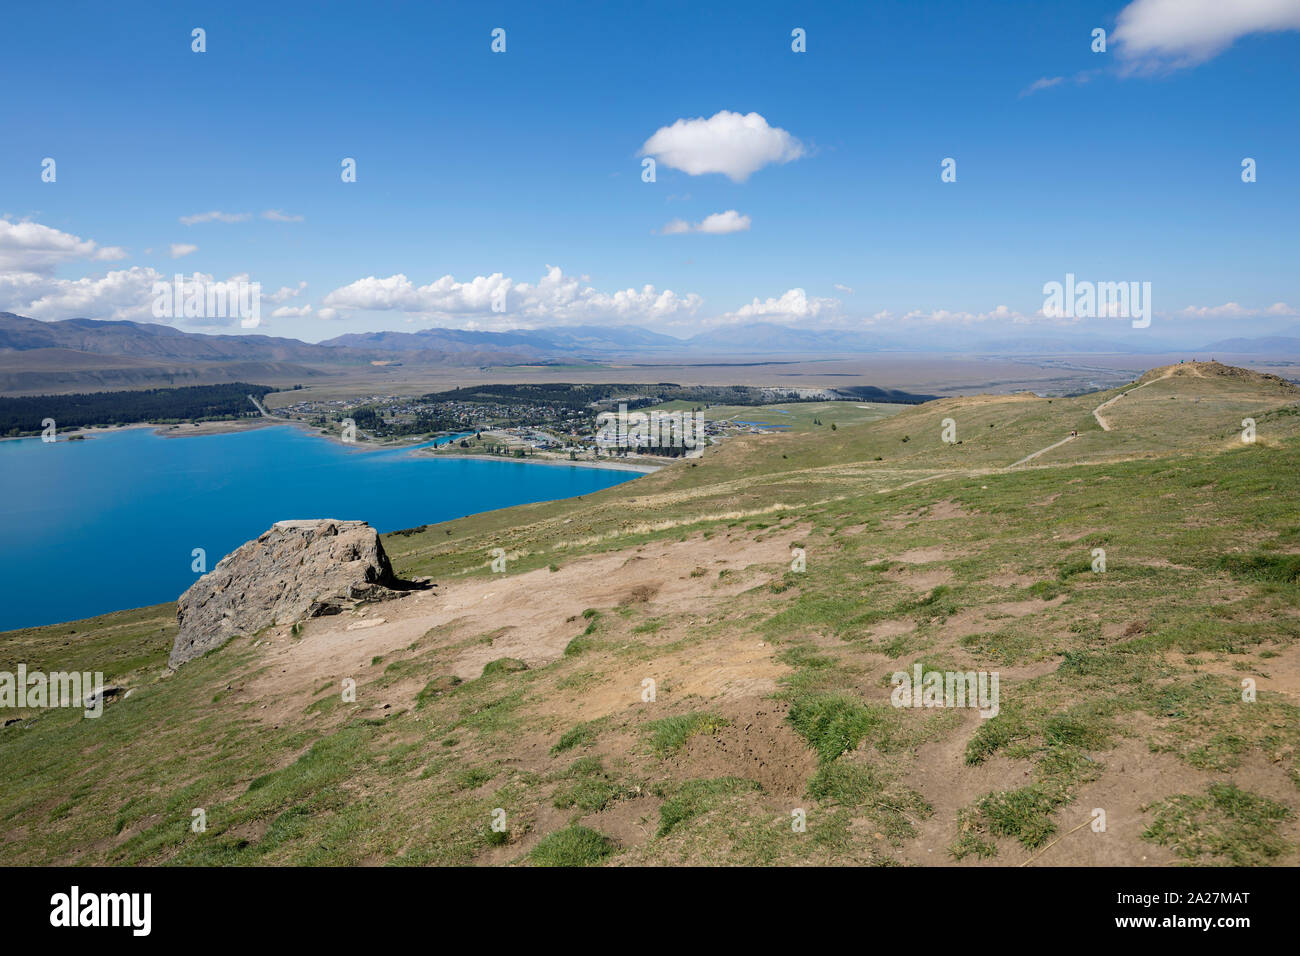 Panoramic view of the town Lake Tekapo and observatory in the South Island of New Zealand Stock Photo